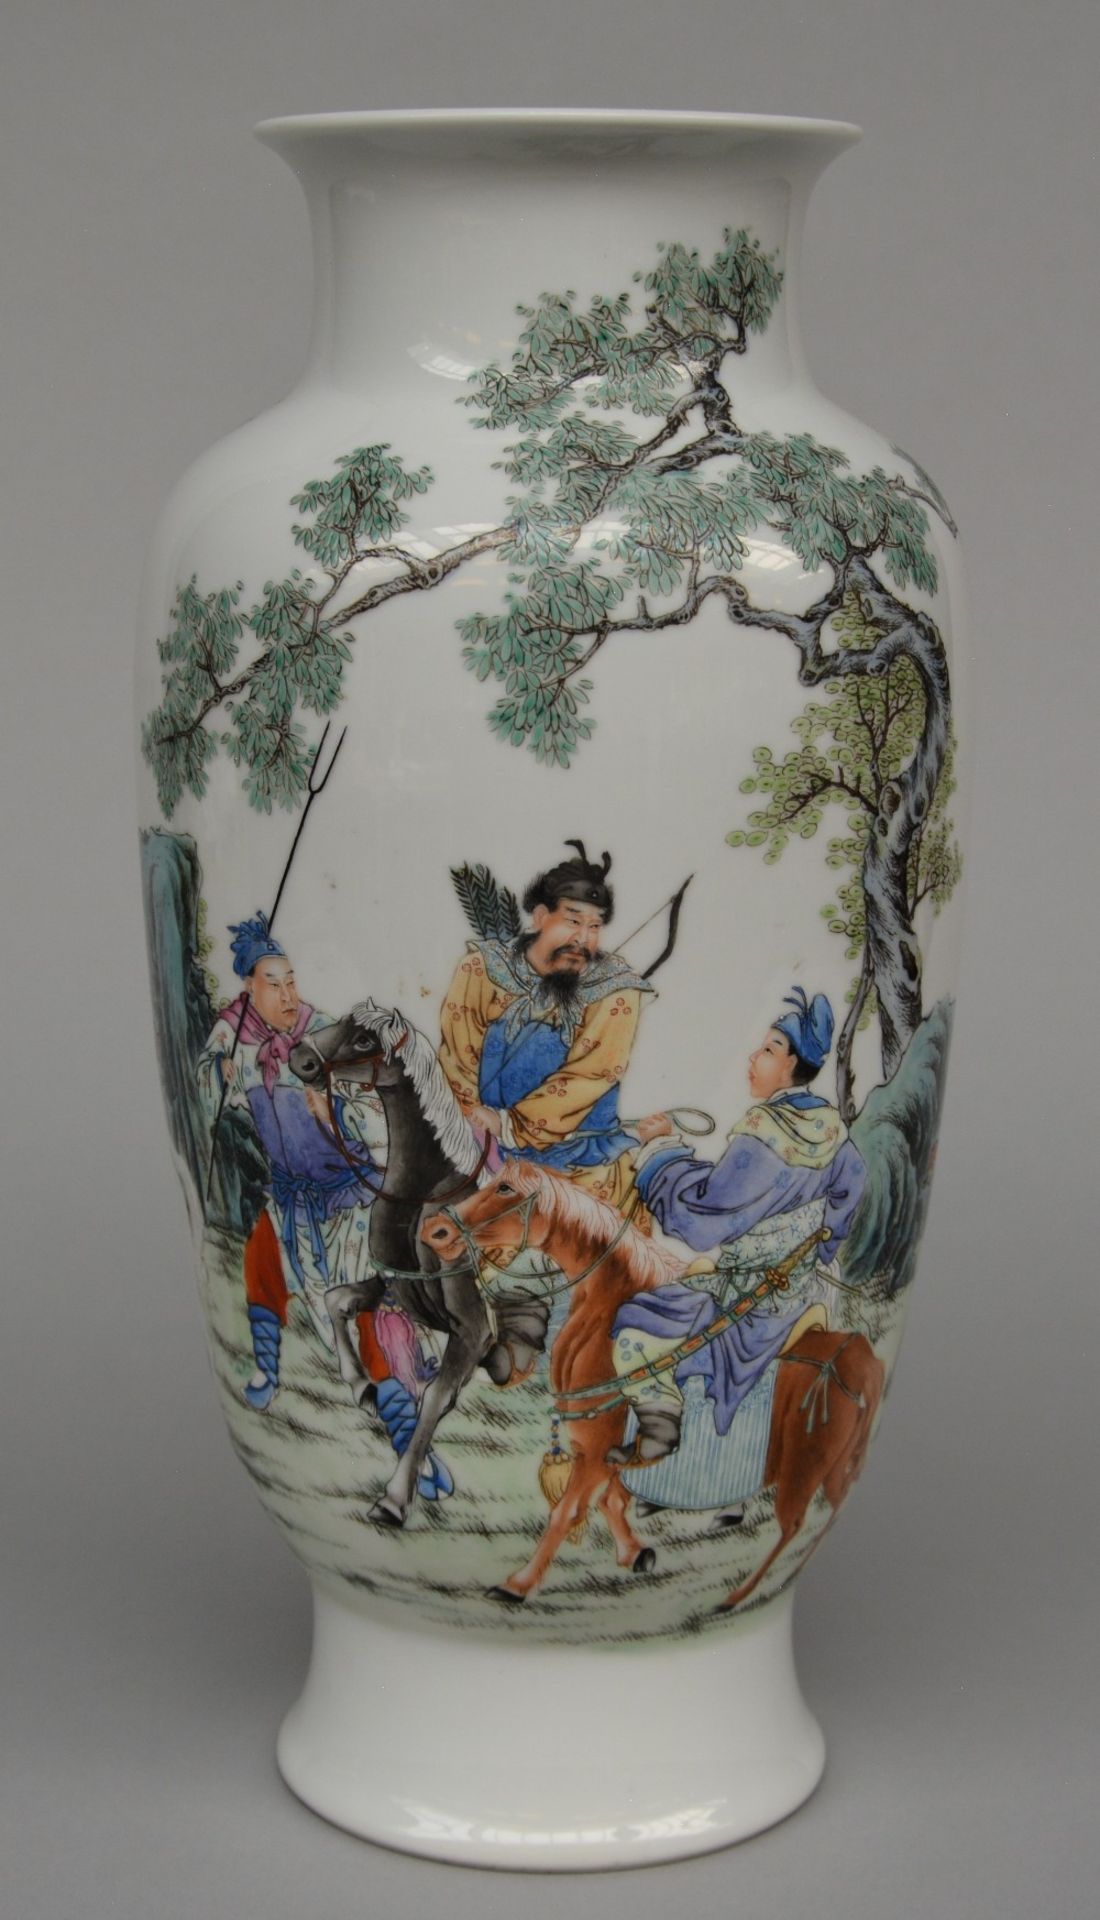 A Chinese polychrome decorated vase, painted with a hunting scene, marked, 20thC, H 36,5 cm